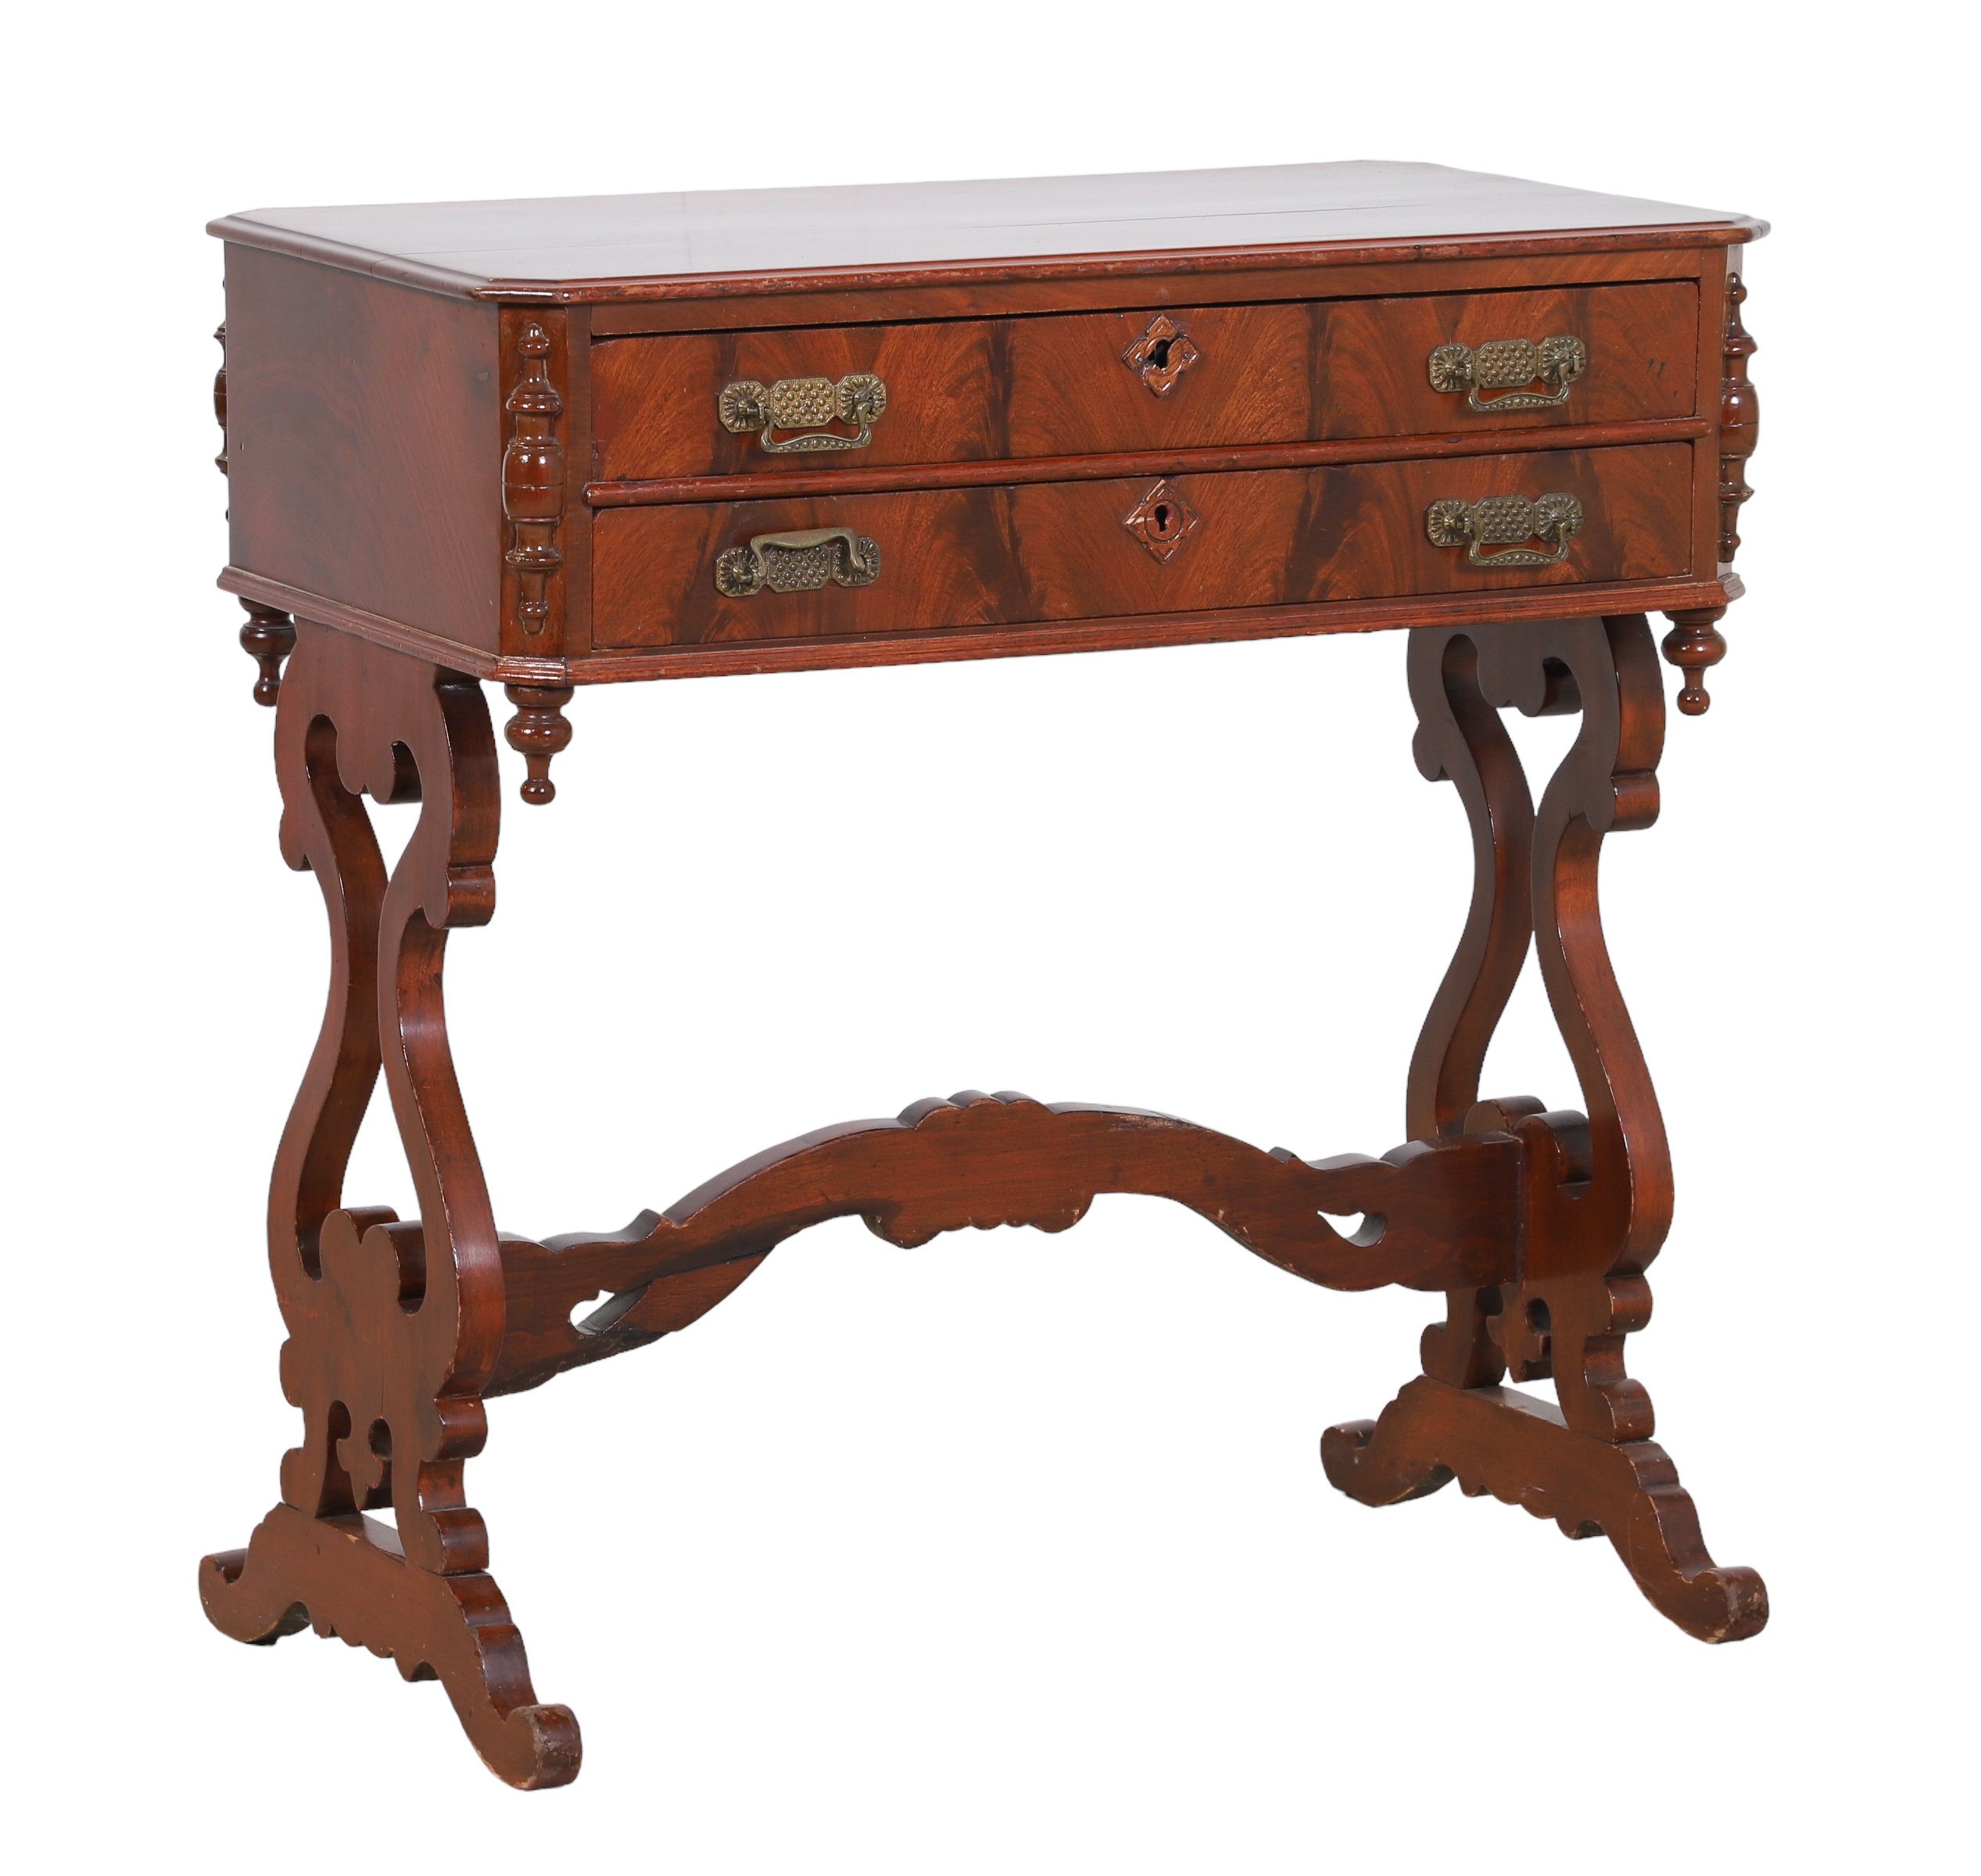 Mahogany carved two drawer console 3b17a9